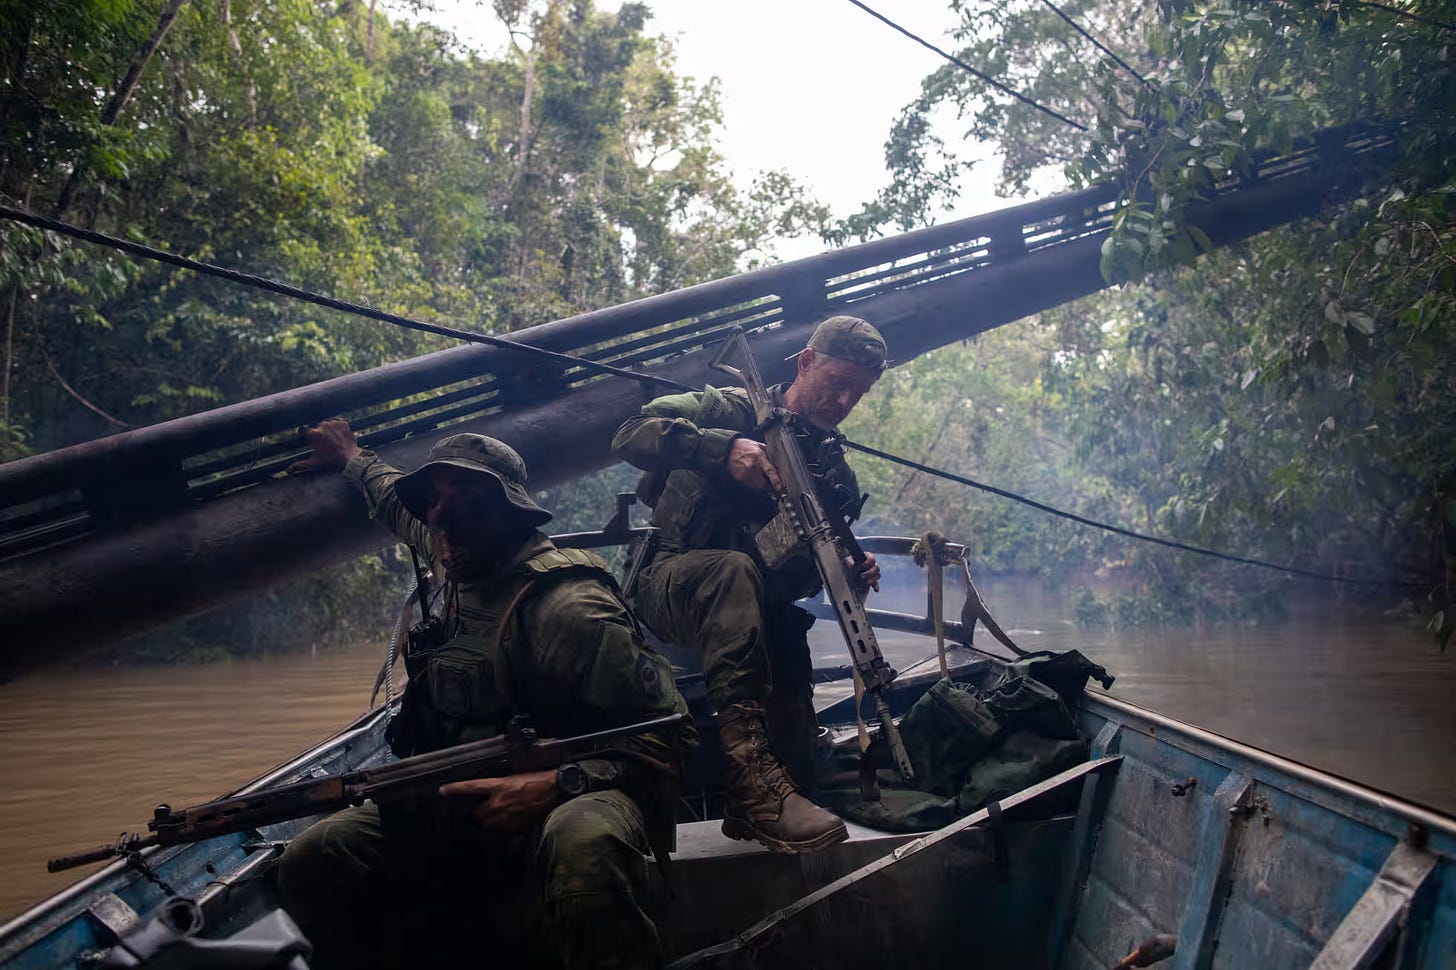 Armed with assault rifles, special forces troops from Brazil’s environmental protection agency, Ibama, inspect a dredger.